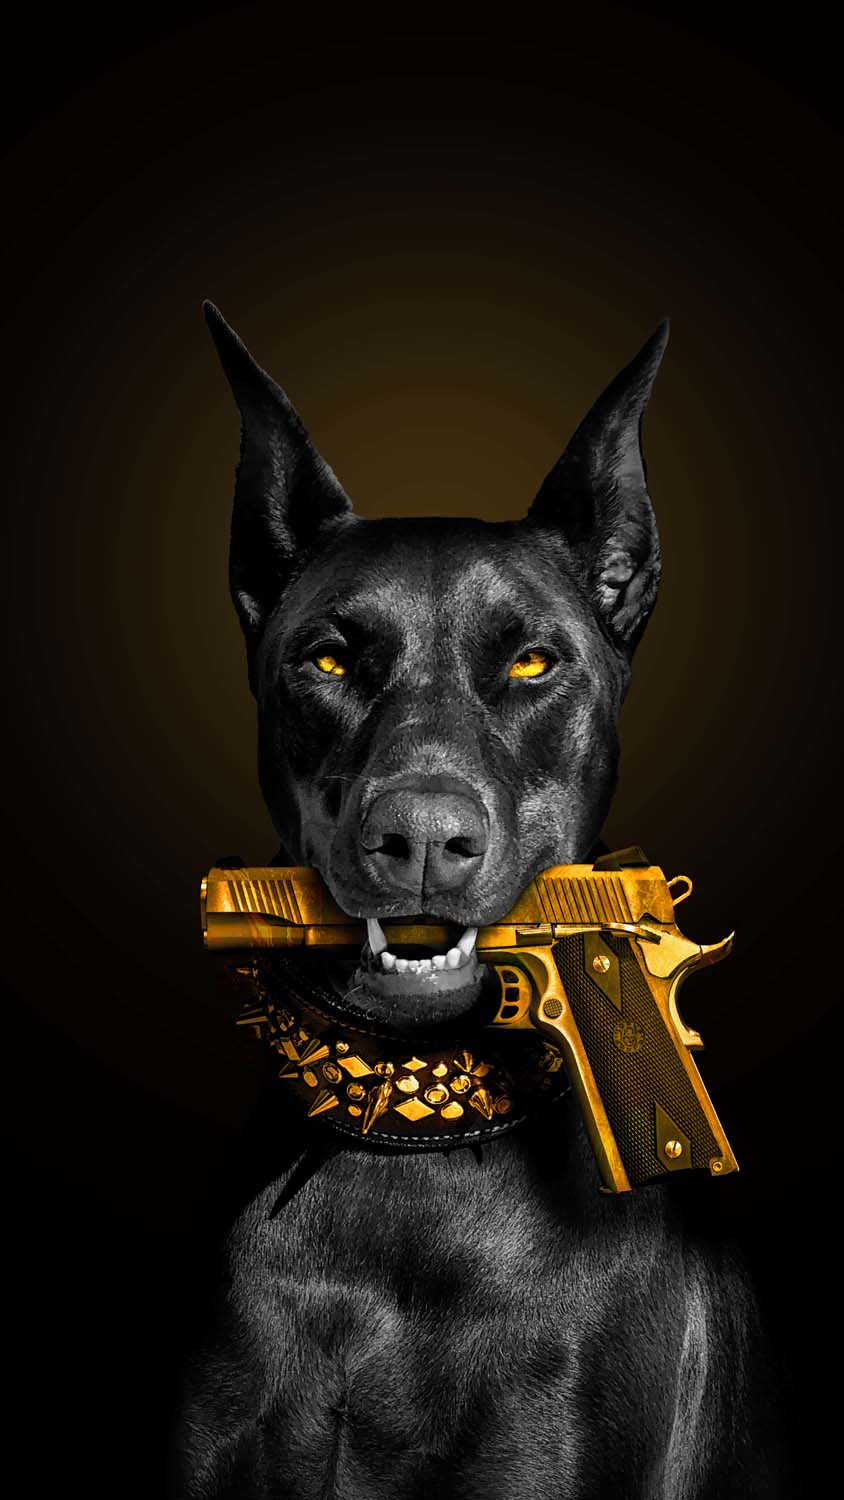 Mafia Dog IPhone Wallpaper HD - IPhone Wallpapers : iPhone Wallpapers